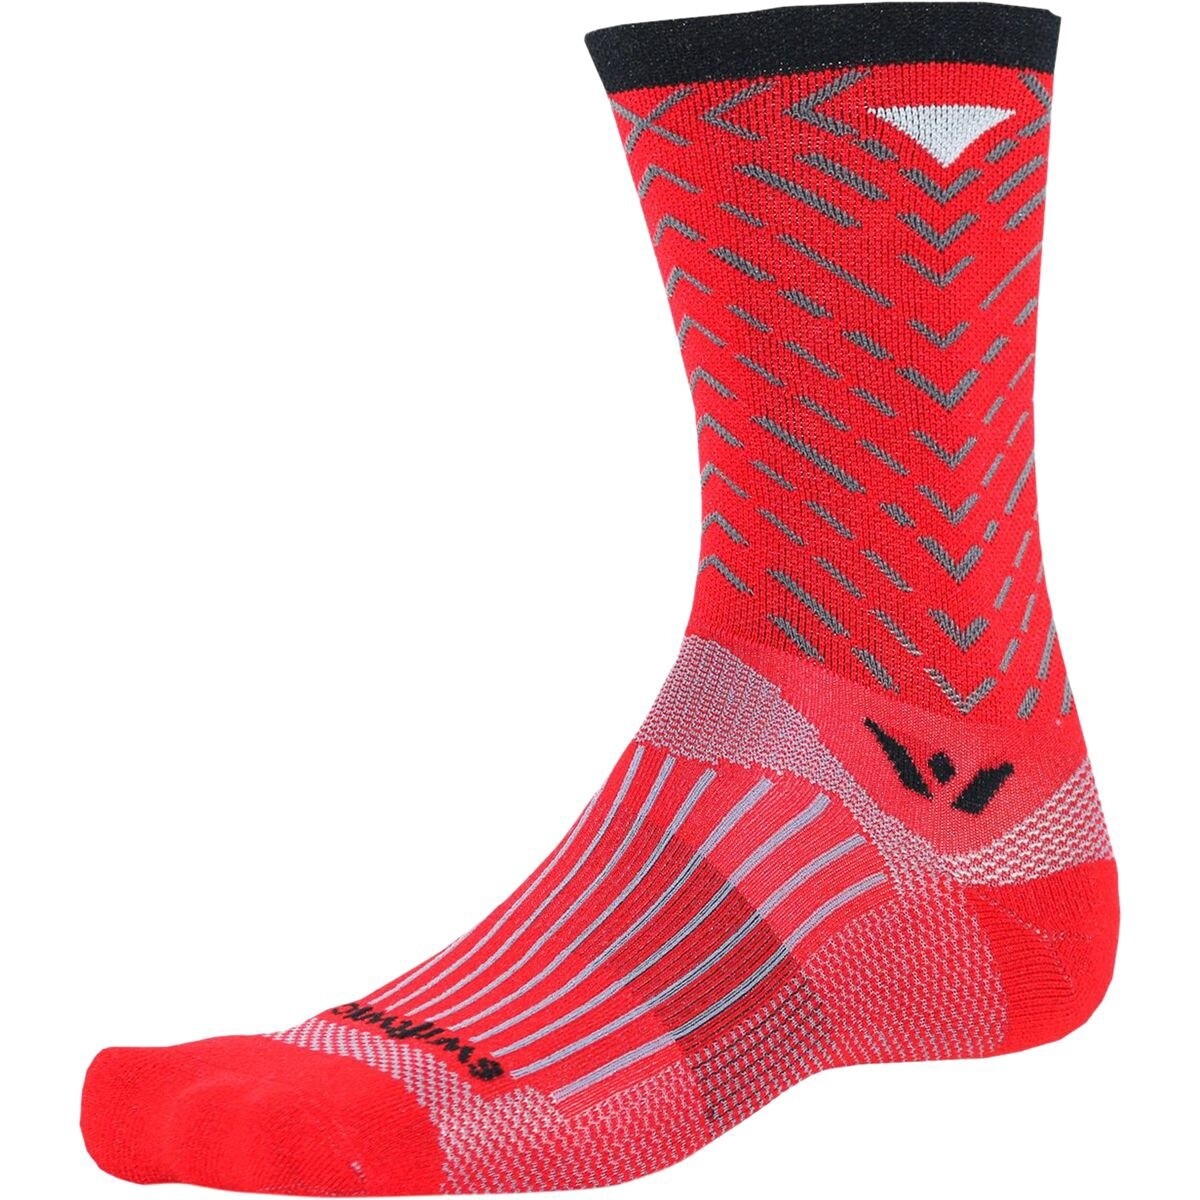 Swiftwick Vision Seven Tread Sock: Red MD MSWIFTW51